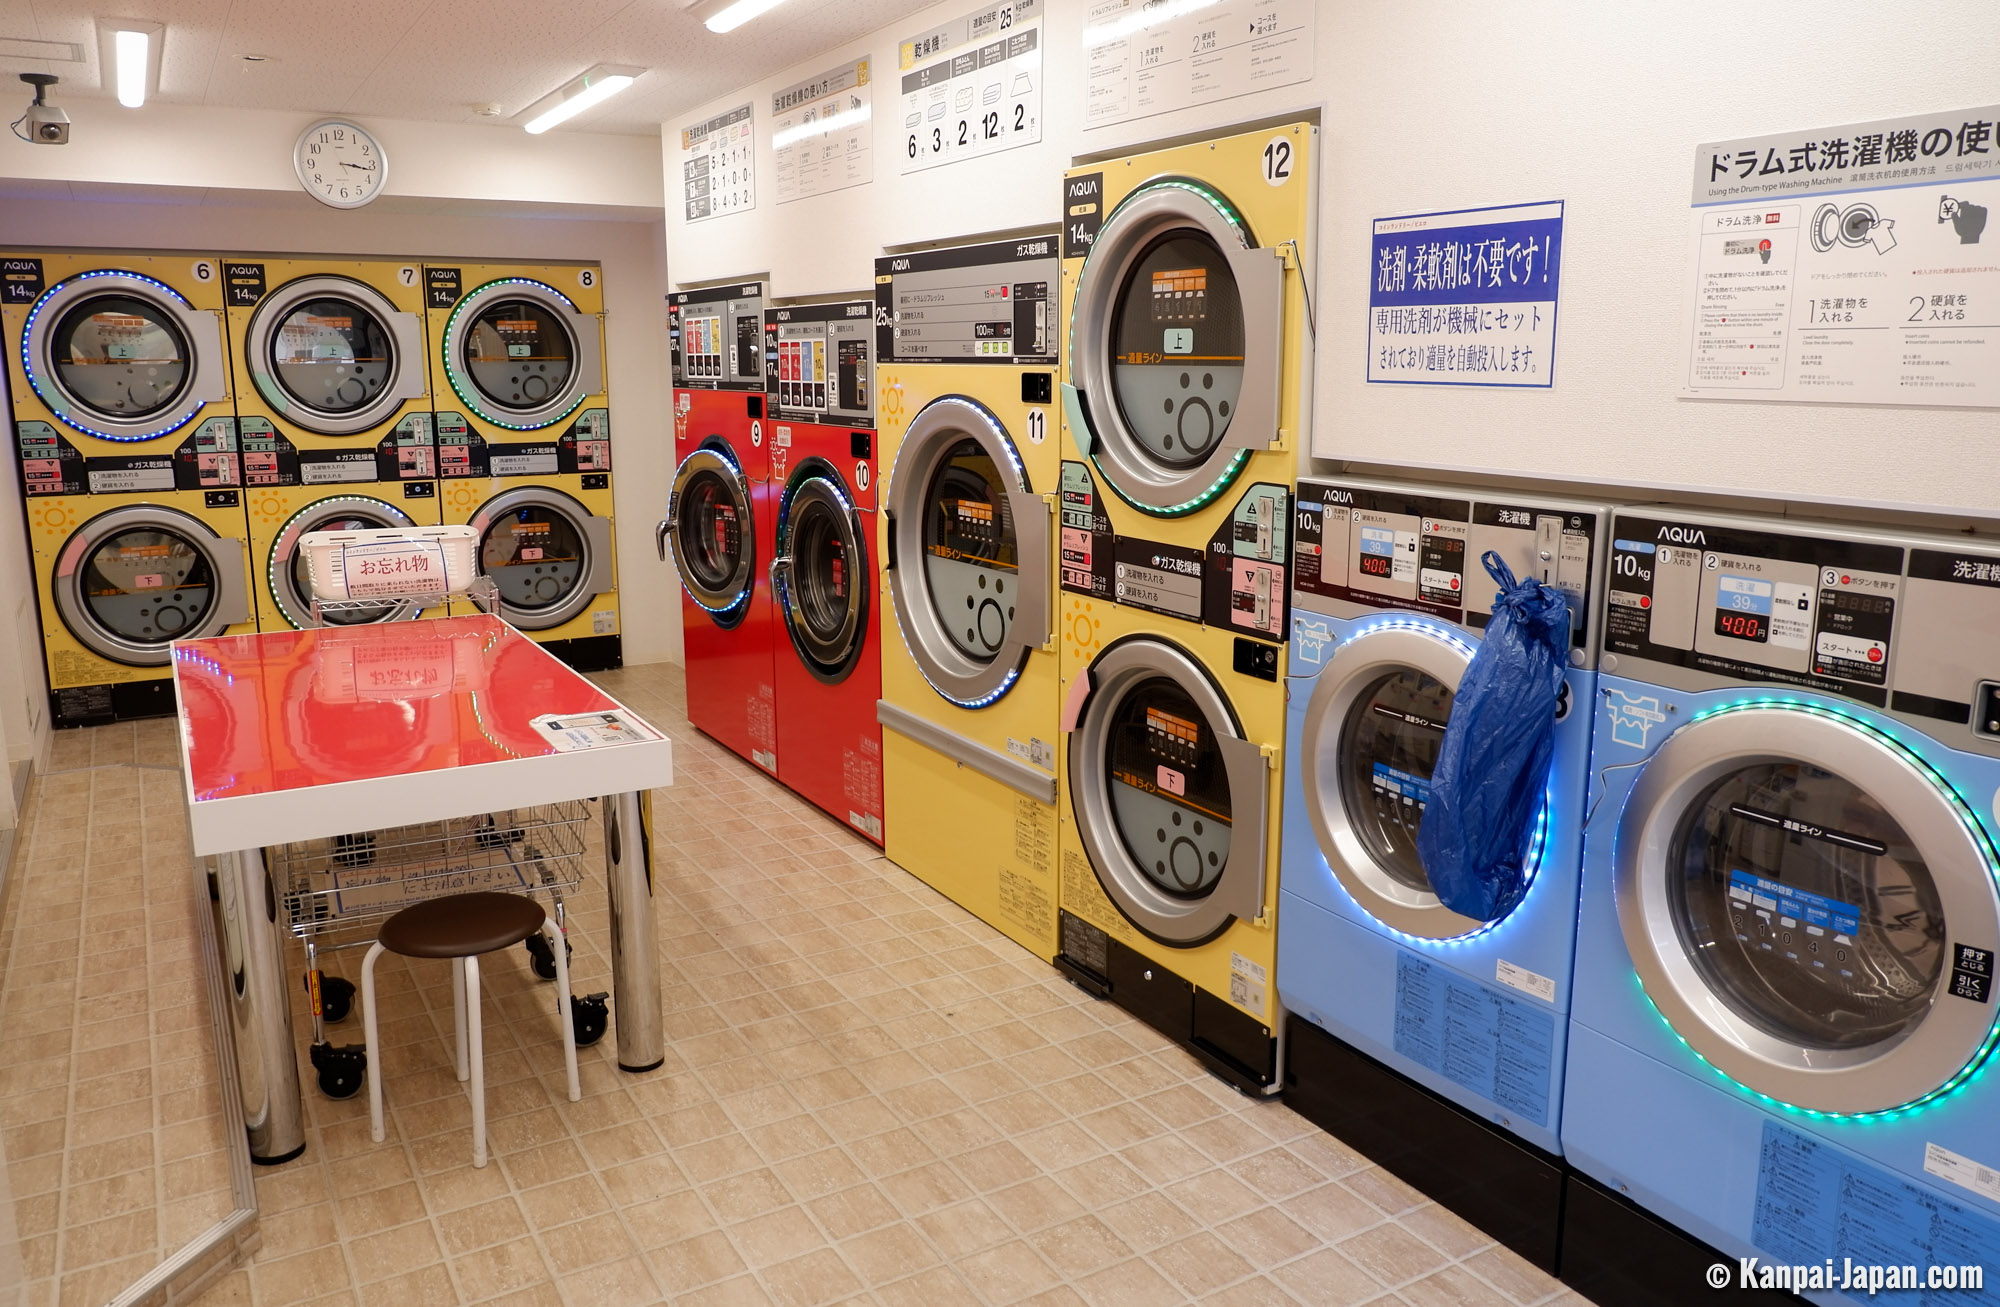 Laundry on the go: A Guide to Keeping your Clothes Clean while Traveling  Japan